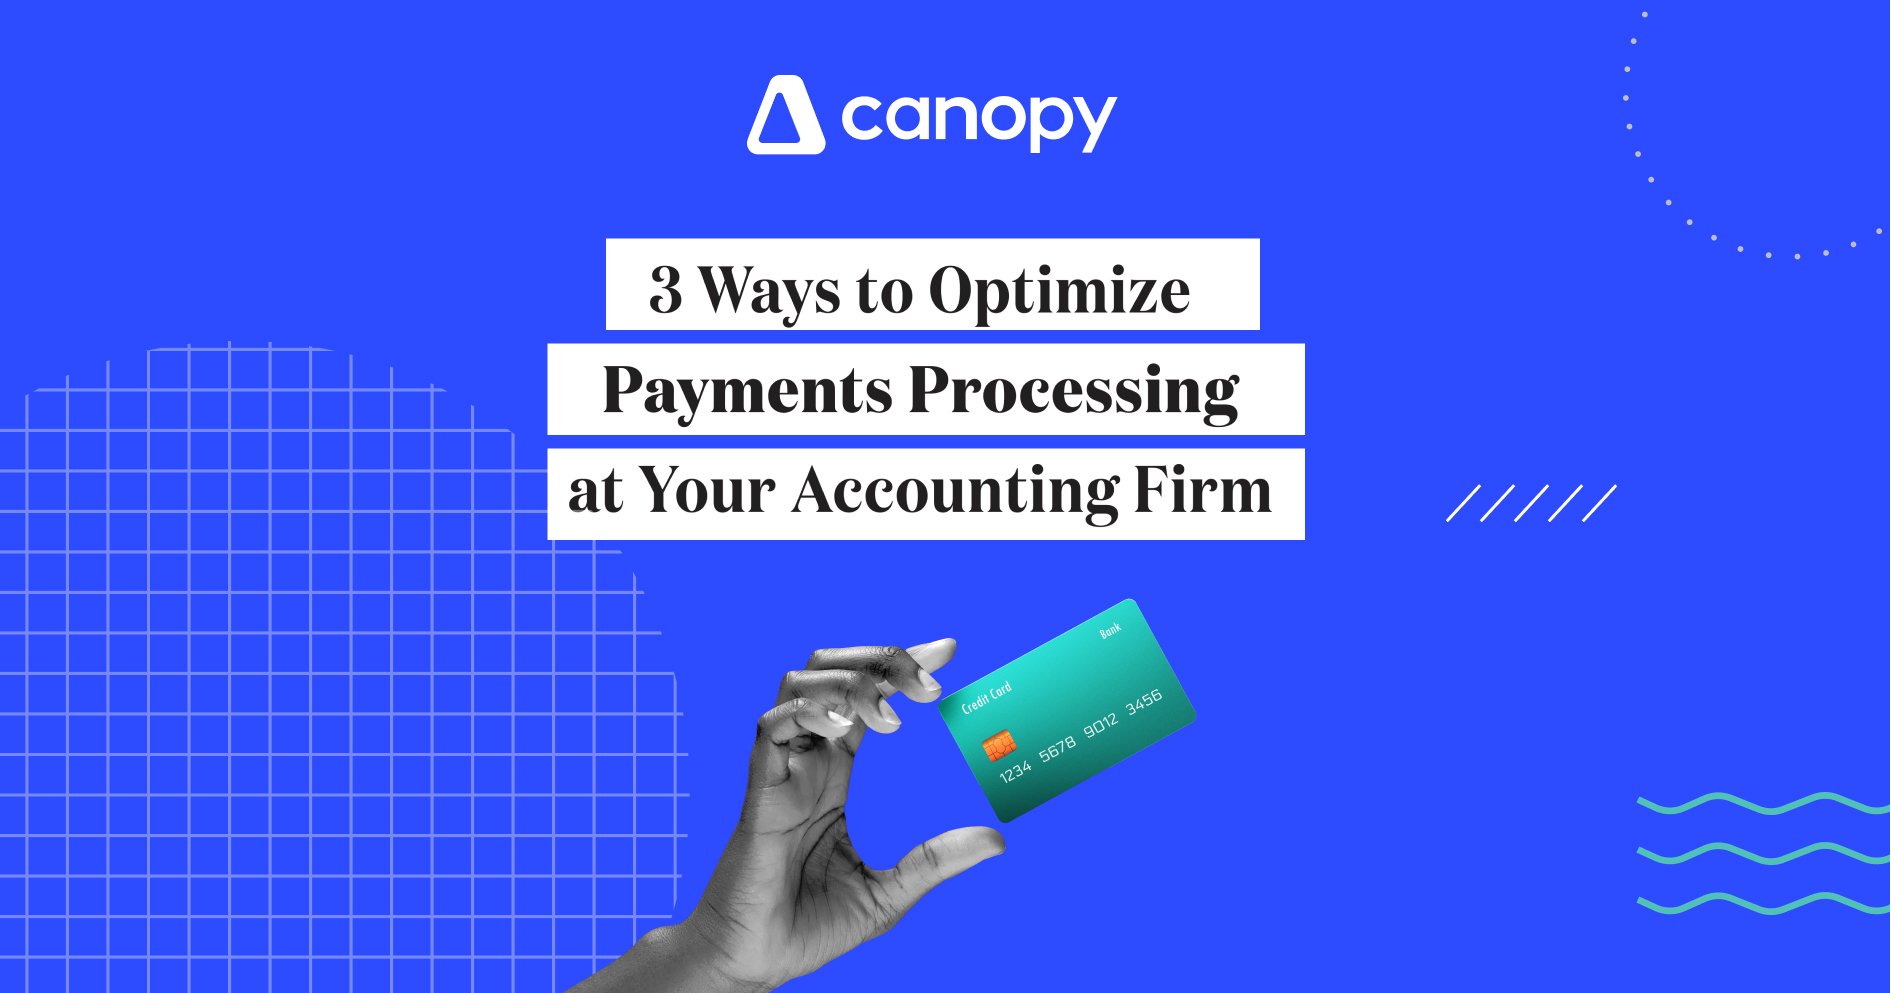 Get Paid Faster — 3 Ways to Optimize Payments Processing at Your Accounting Firm